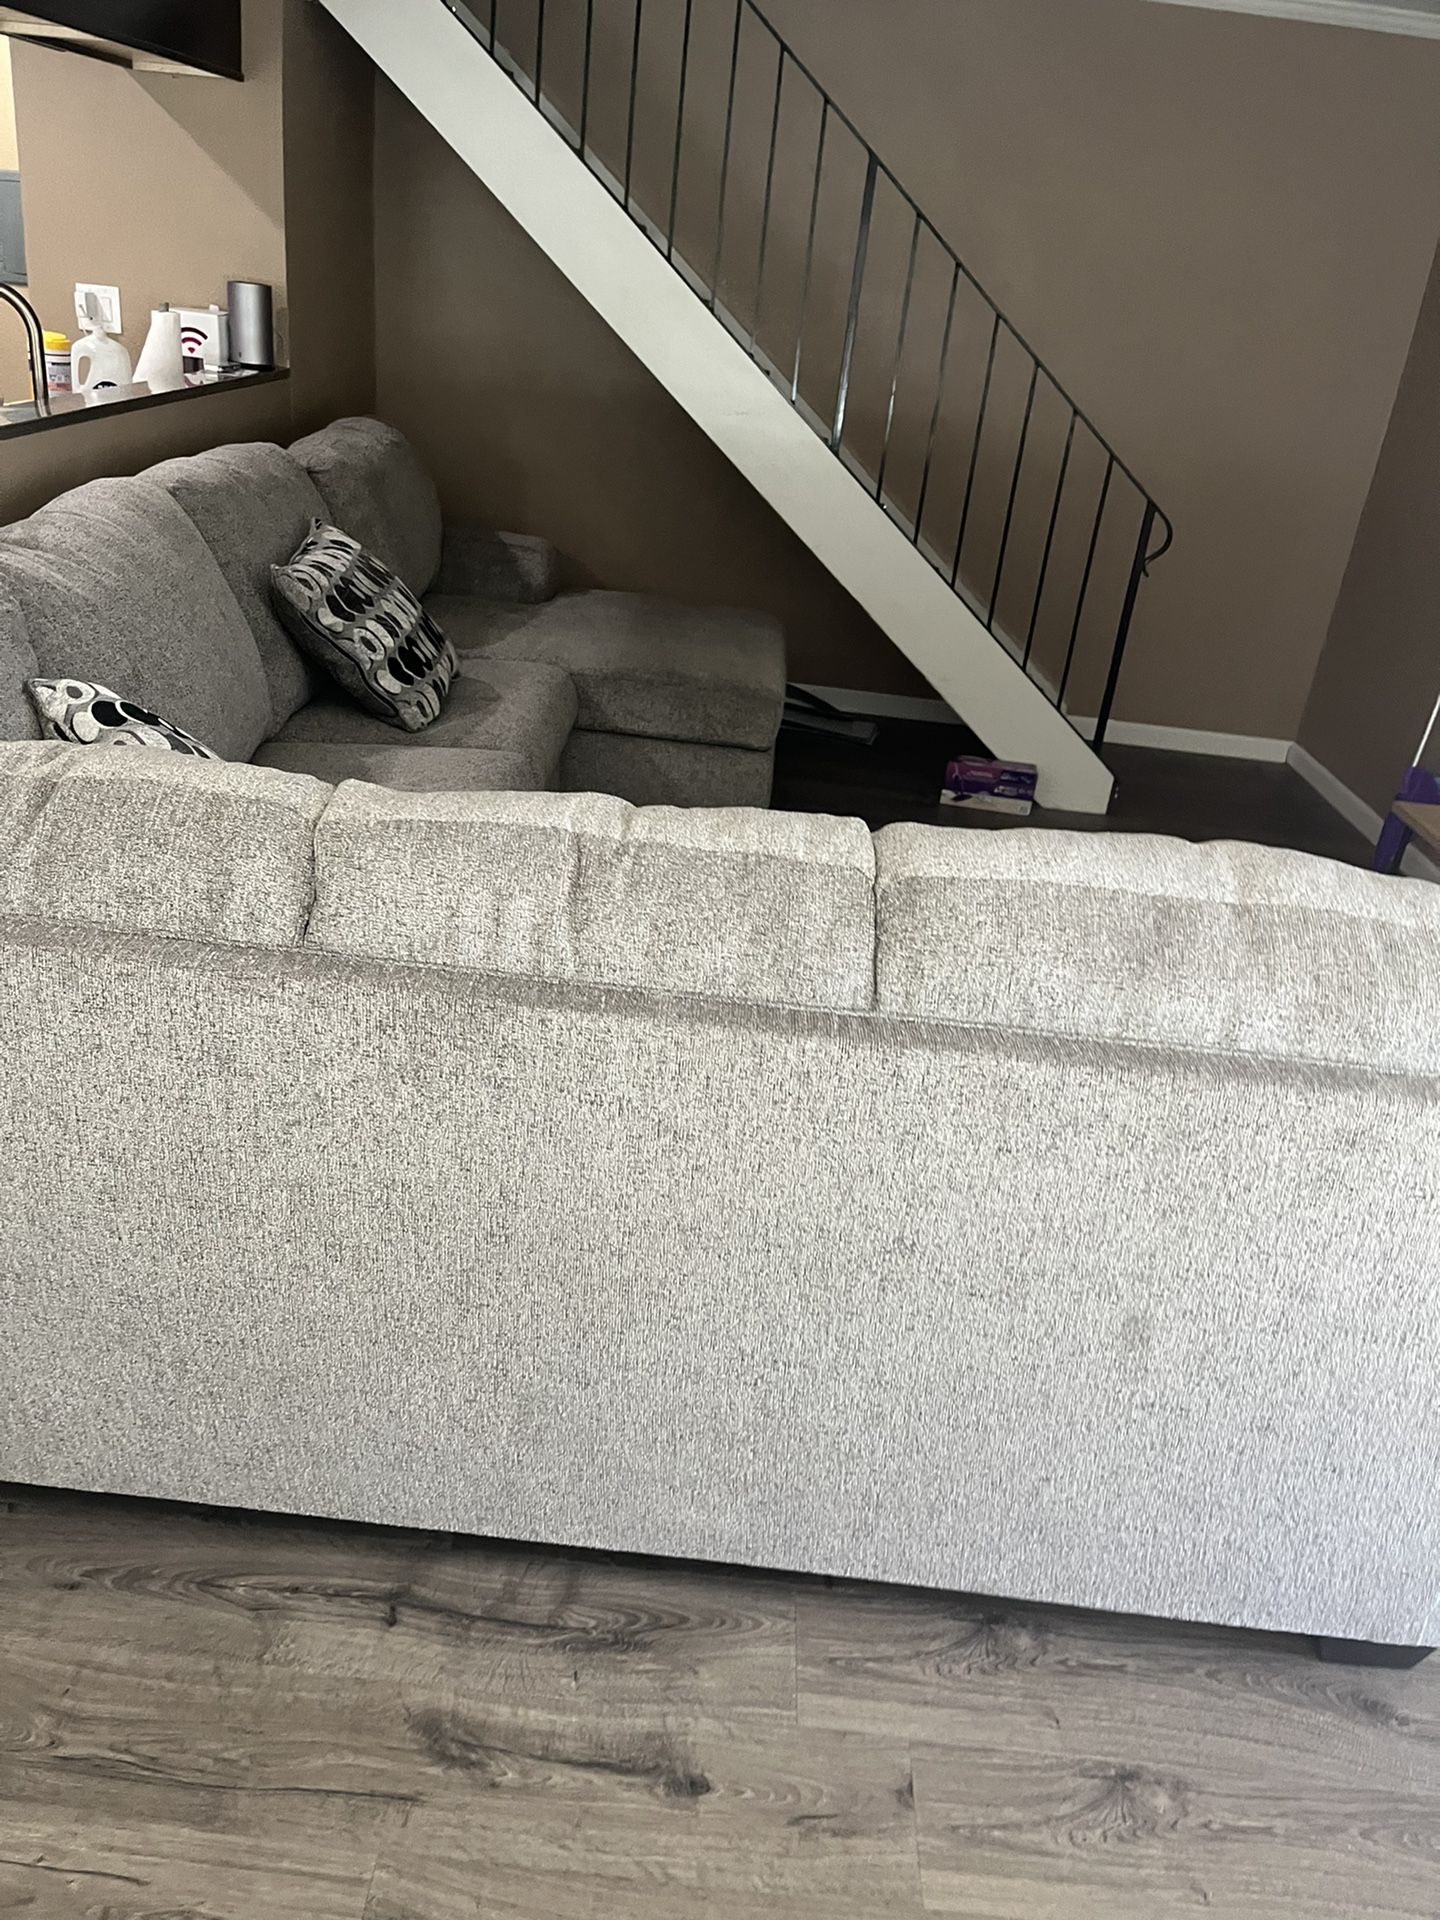 Brand New Couch ! 